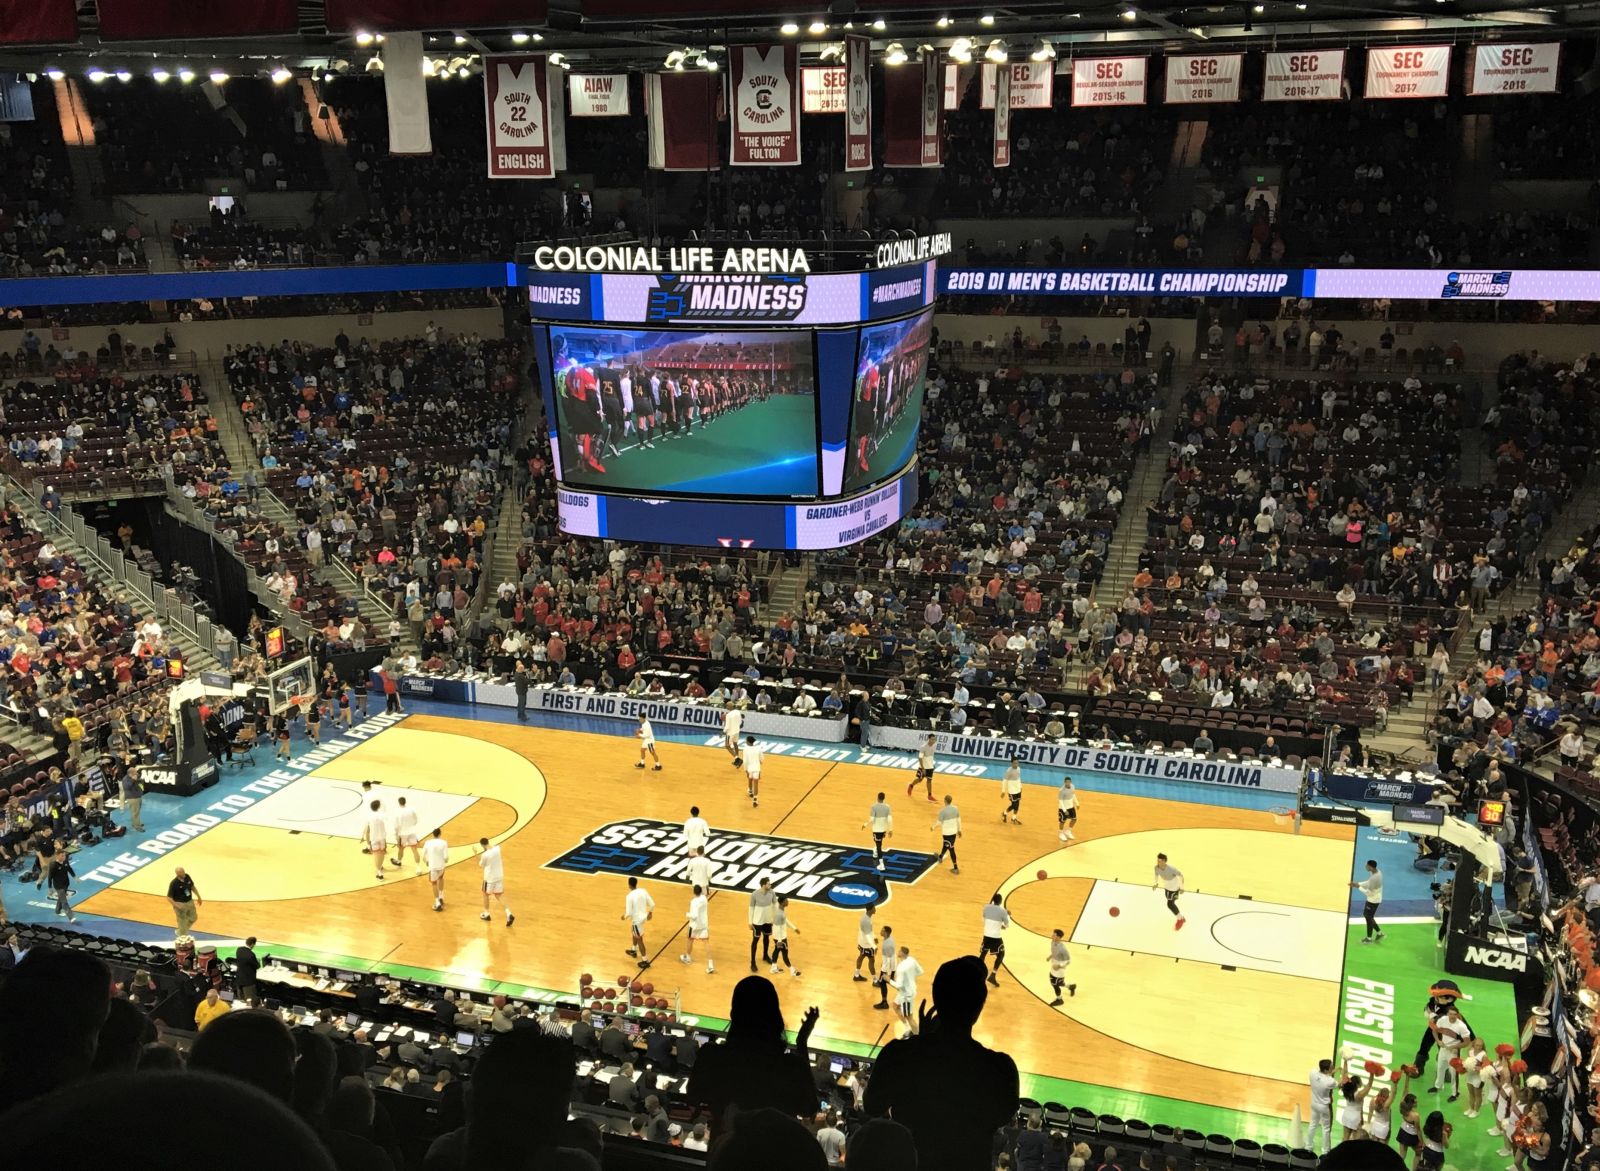 Virginia players warm up before their NCAA regional game in Columbia in March. The Cavaliers went on to win the NCAA Championship. (Photo/Melinda Waldrop)